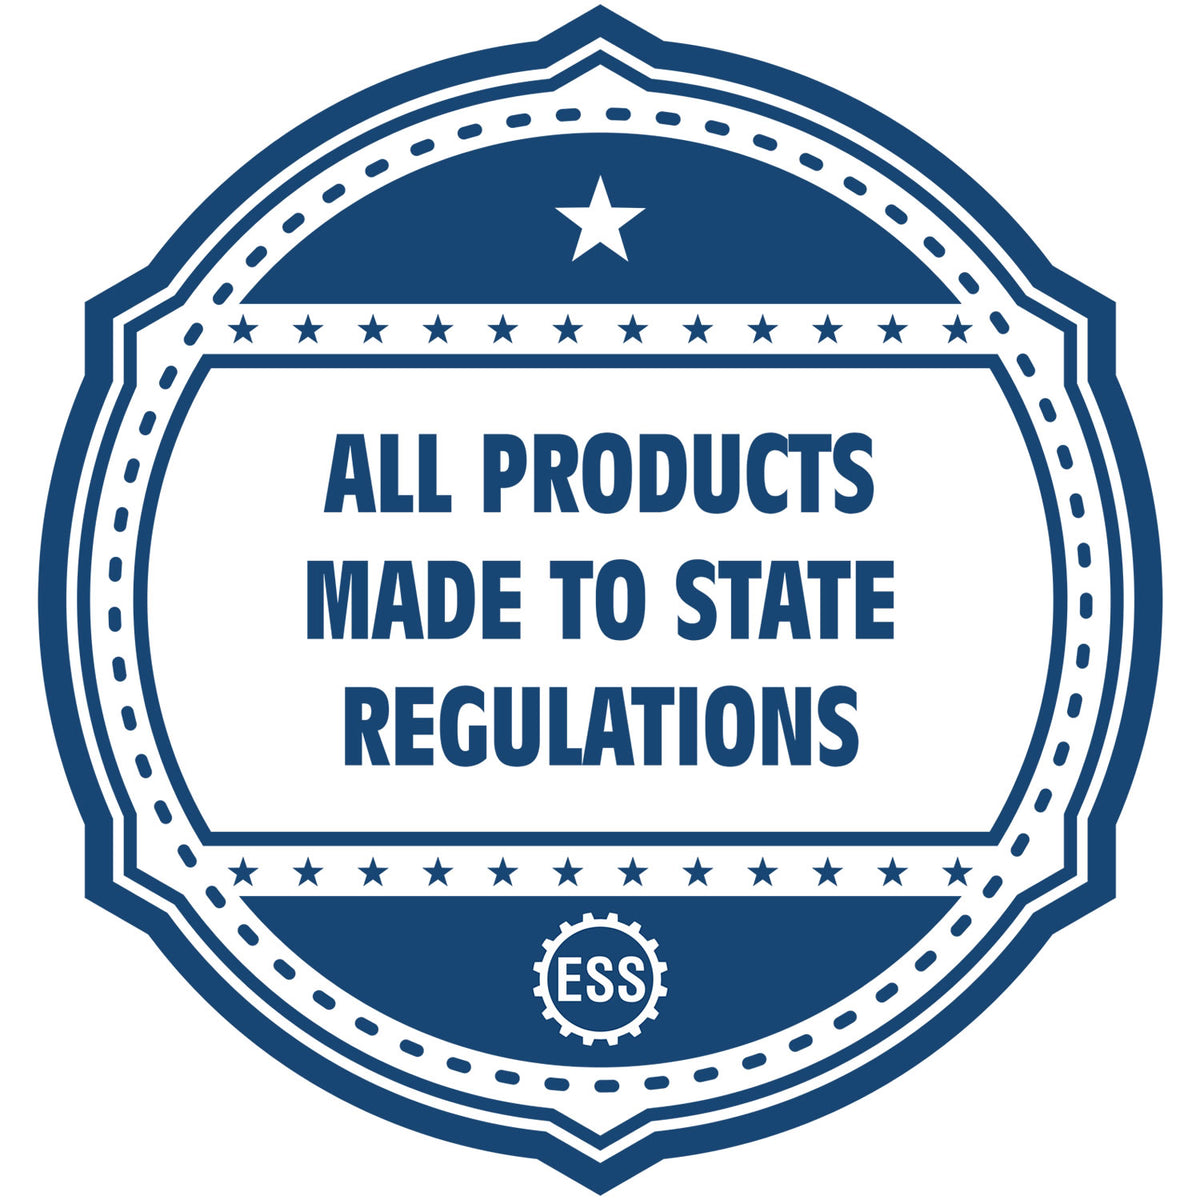 A blue icon or badge for the State of New Hampshire Extended Long Reach Geologist Seal showing that this product is made in compliance with state regulations.